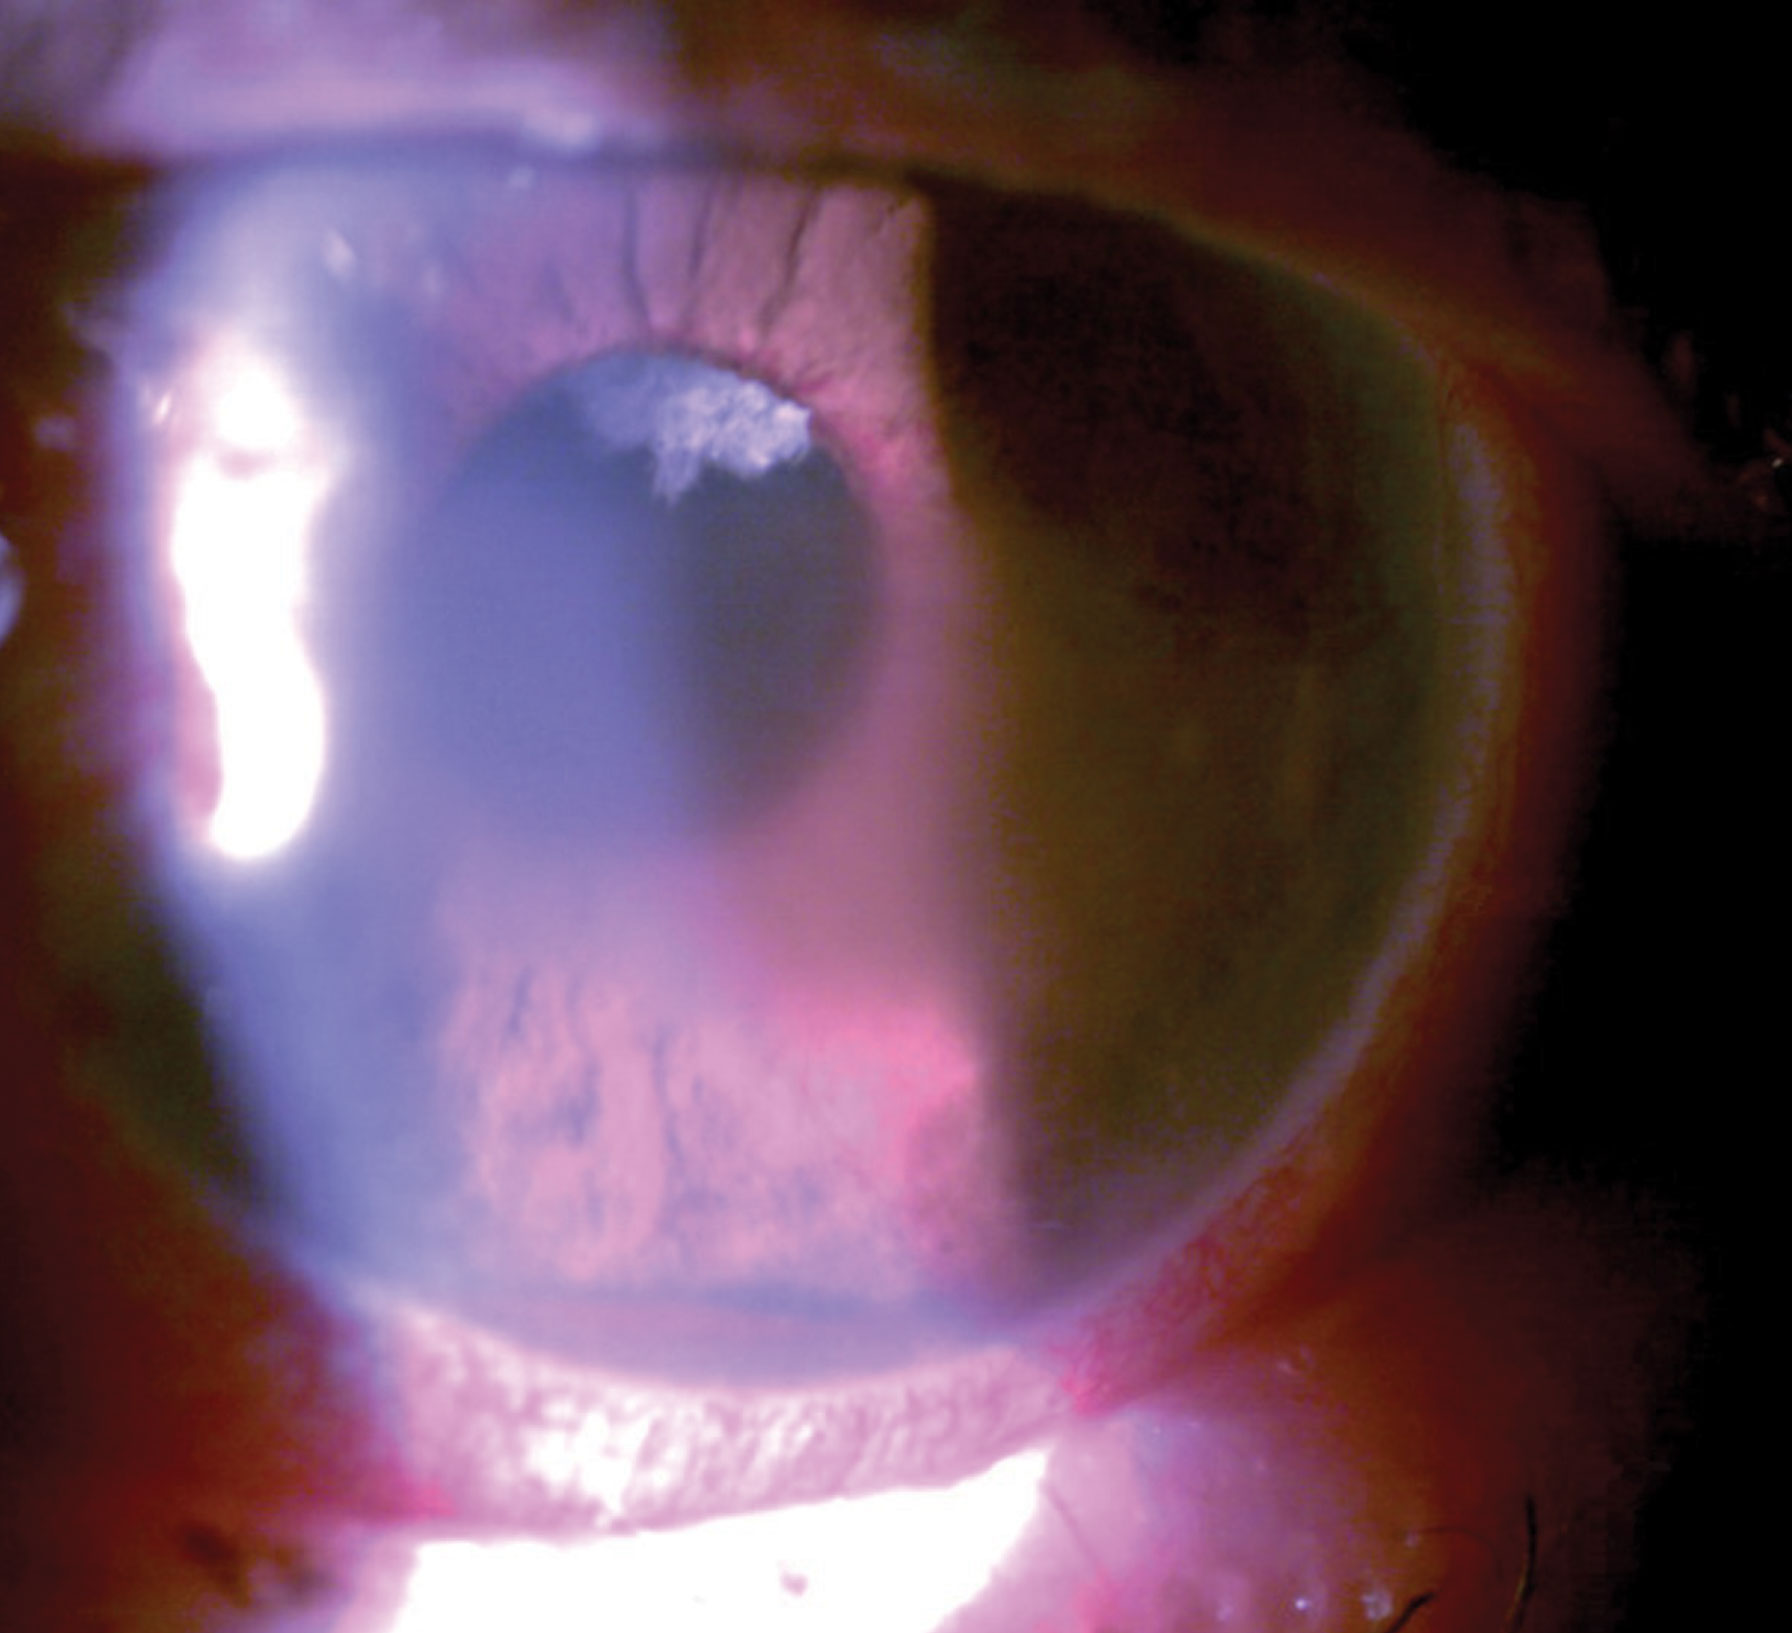 This patient had pain with vision loss and profound pathological findings such as hyphema, microcystic edema and peripupillary iris neovascularization.